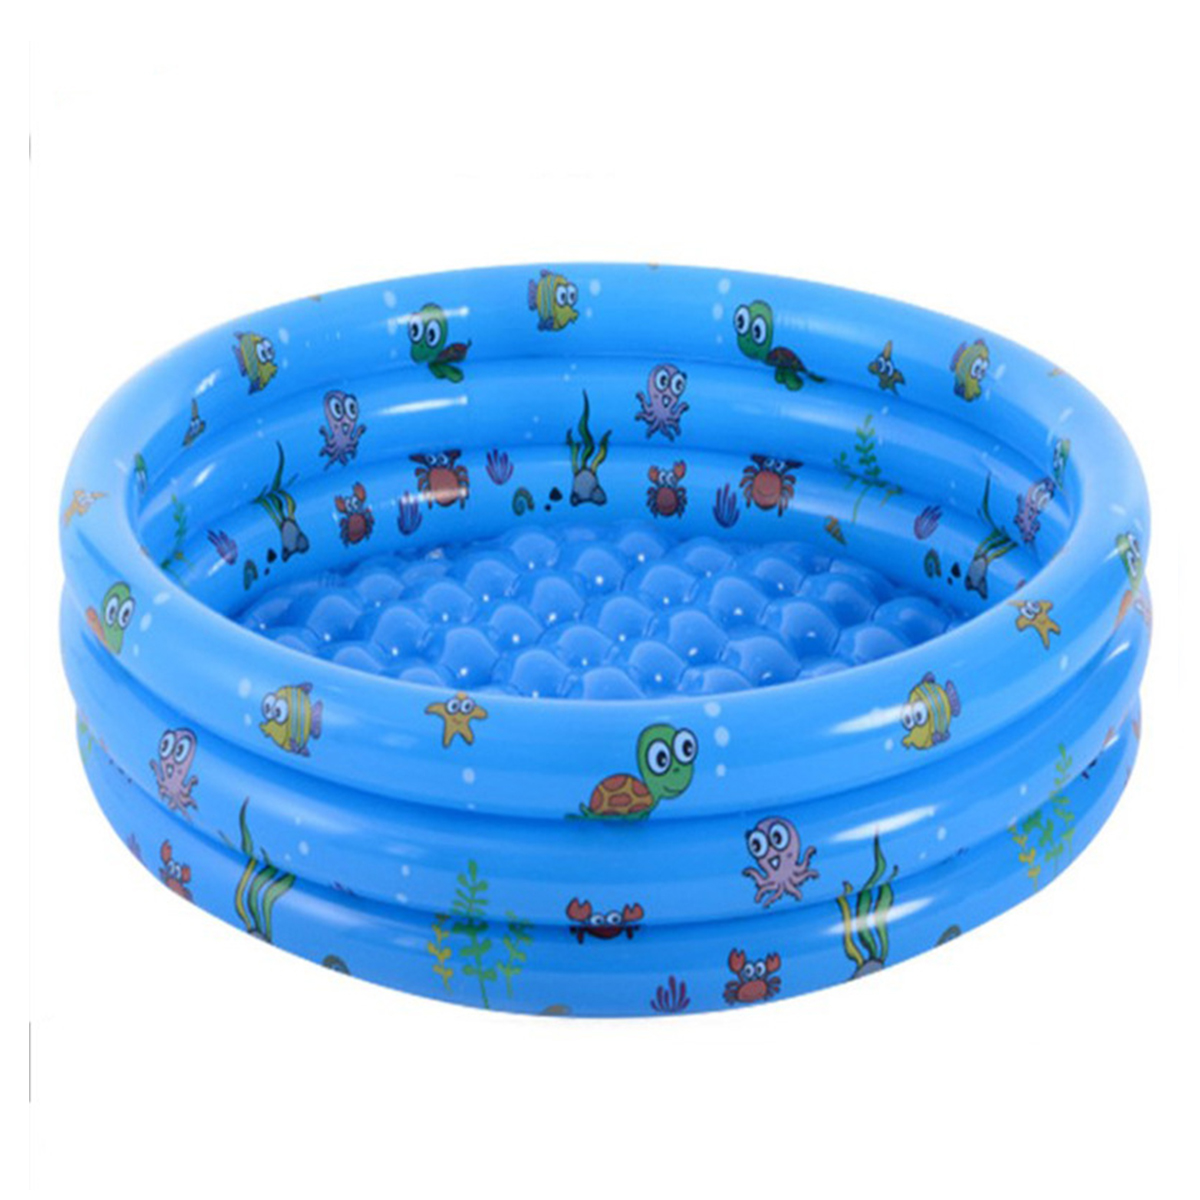 130150CM-Swimming-Pool-Childrens-Baby-Paddling-Pool-Round-Bubble-Bottom-Inflatable-Pool-with-Air-Pum-1815393-7